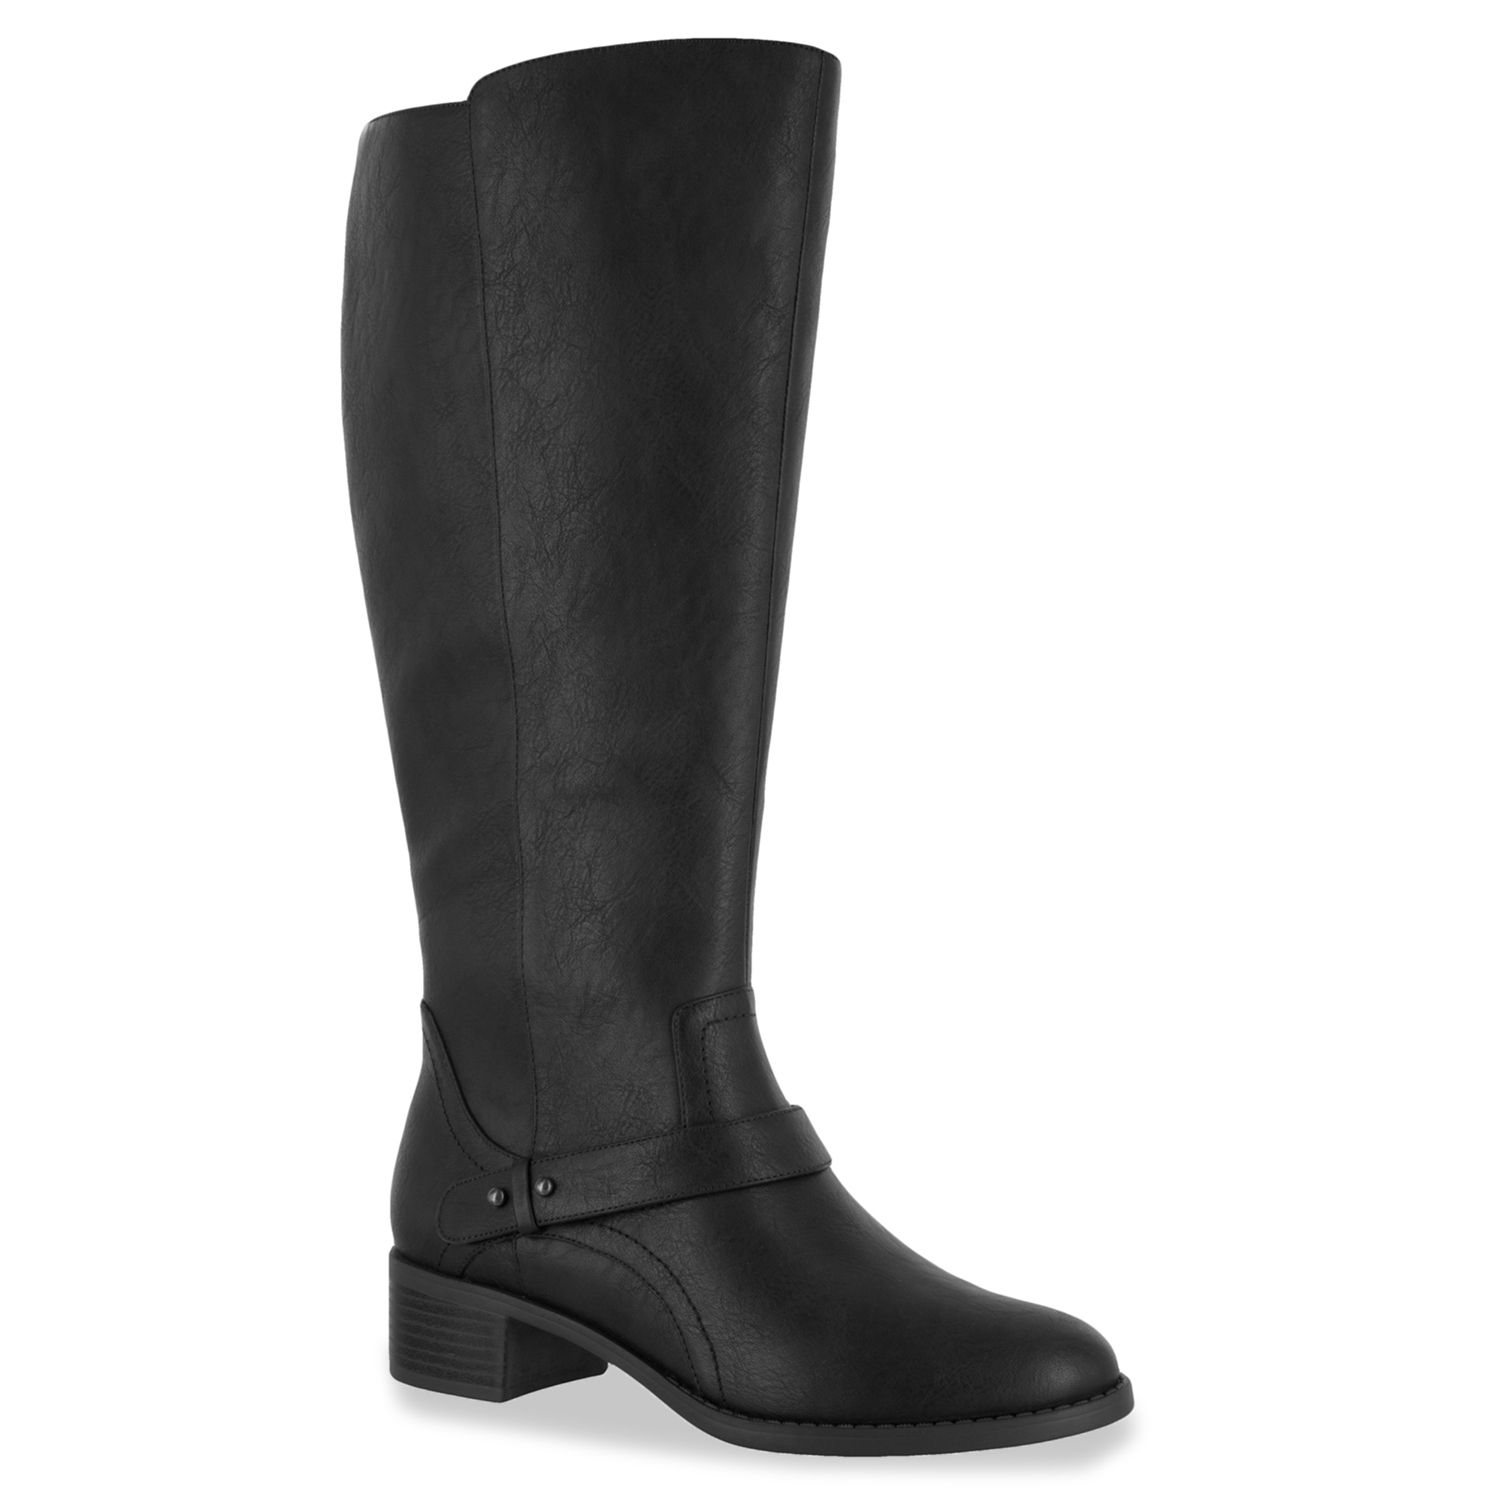 Image for Easy Street Jewel Women's Riding Boots at Kohl's.